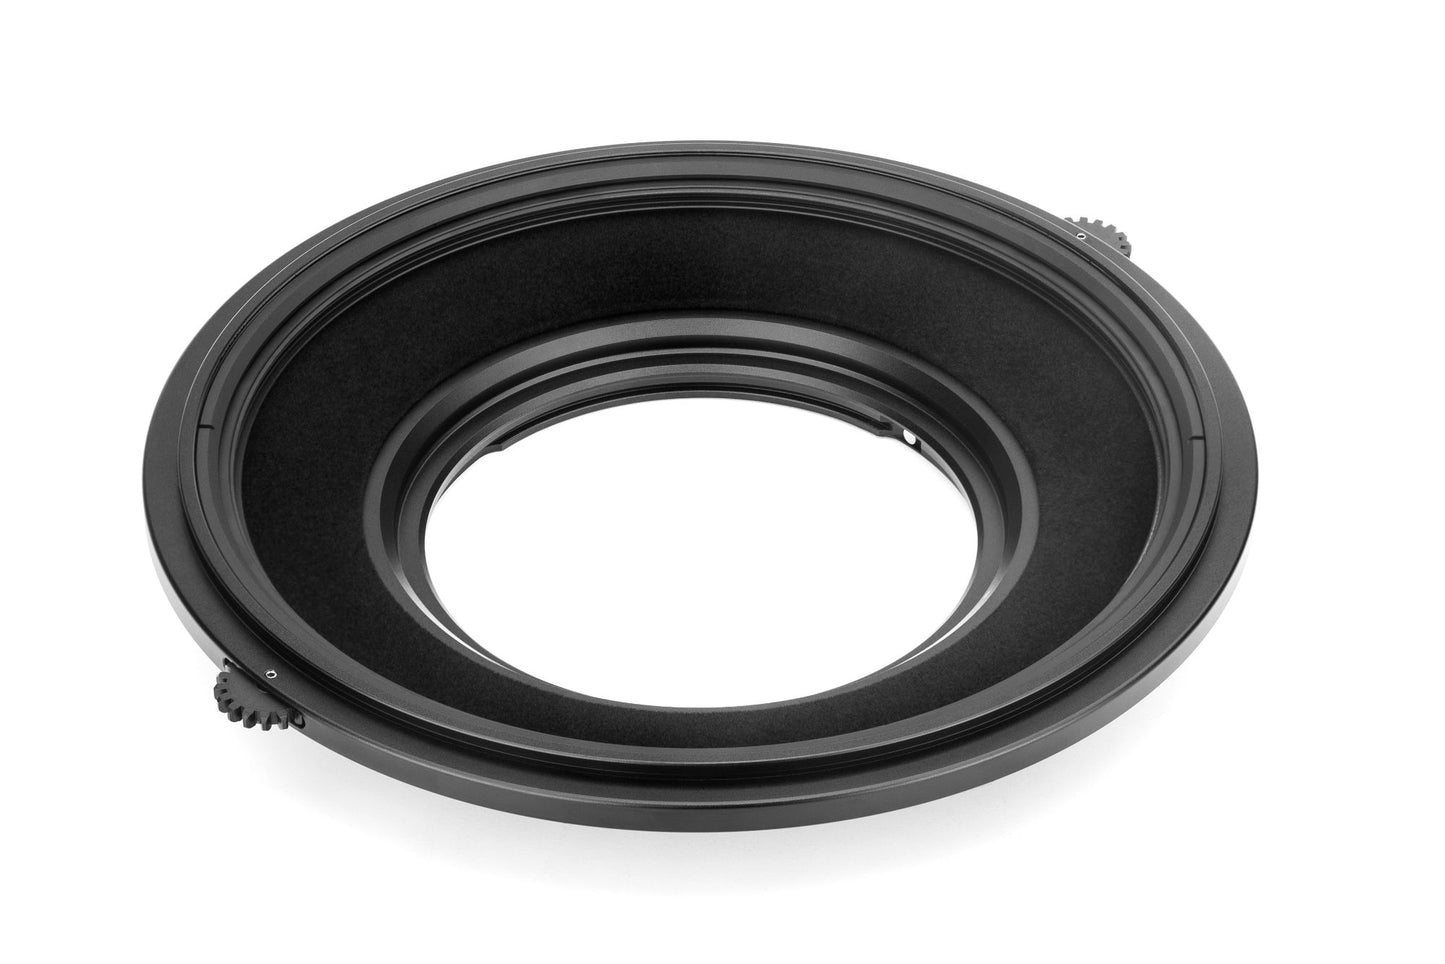 NiSi S6 150mm Filter Holder Kit with Pro CPL for LAOWA FF S 15mm F4.5 W-Dreamer